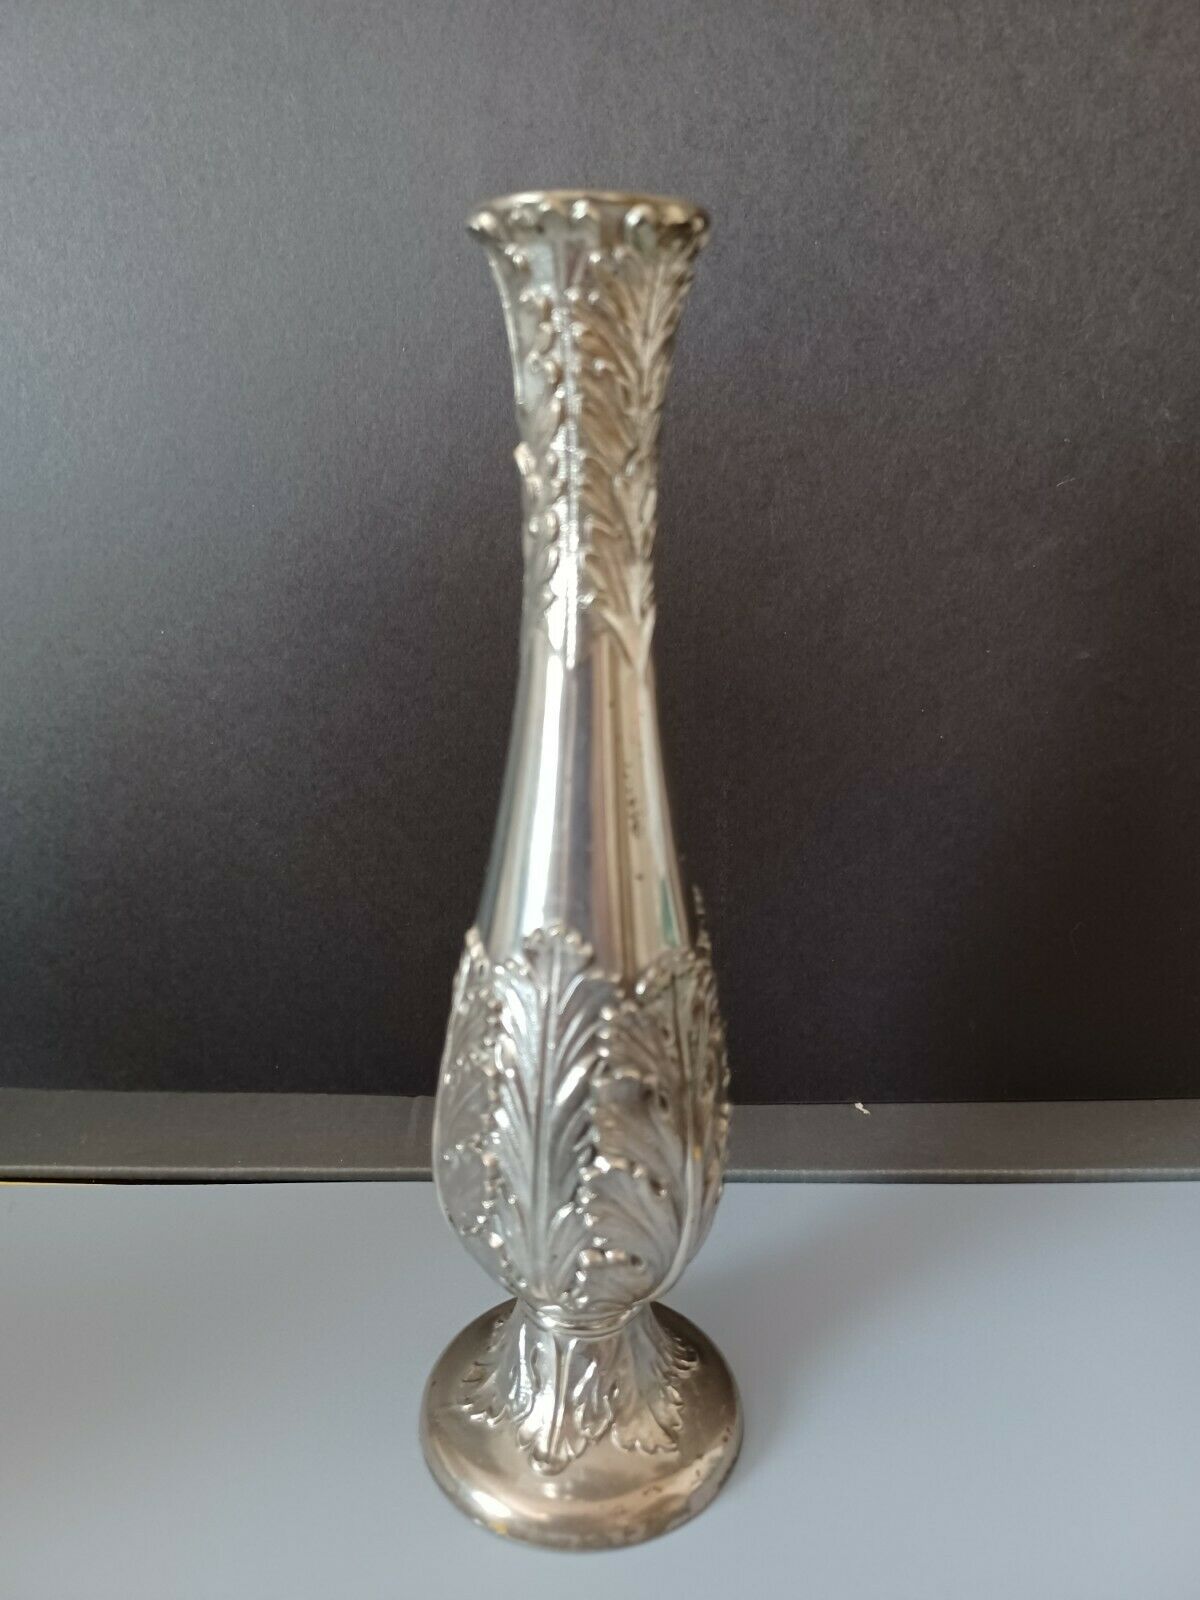 Art Nouveau Silver Plate Bud Vase 7" In In Height